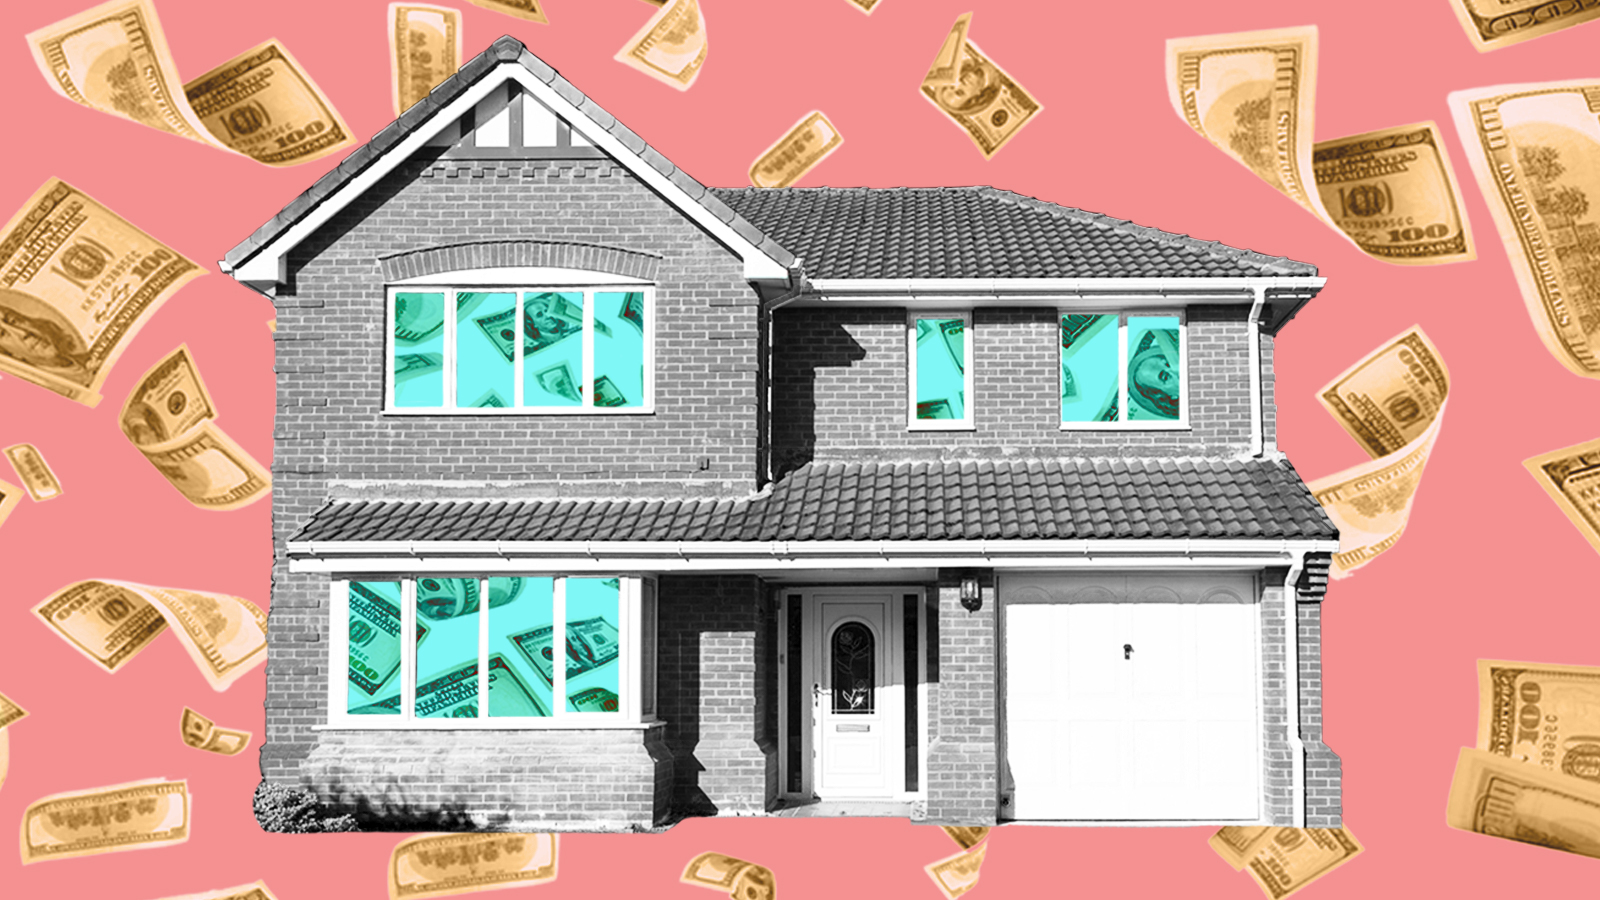 Photo of a house with dollar bills flying around it